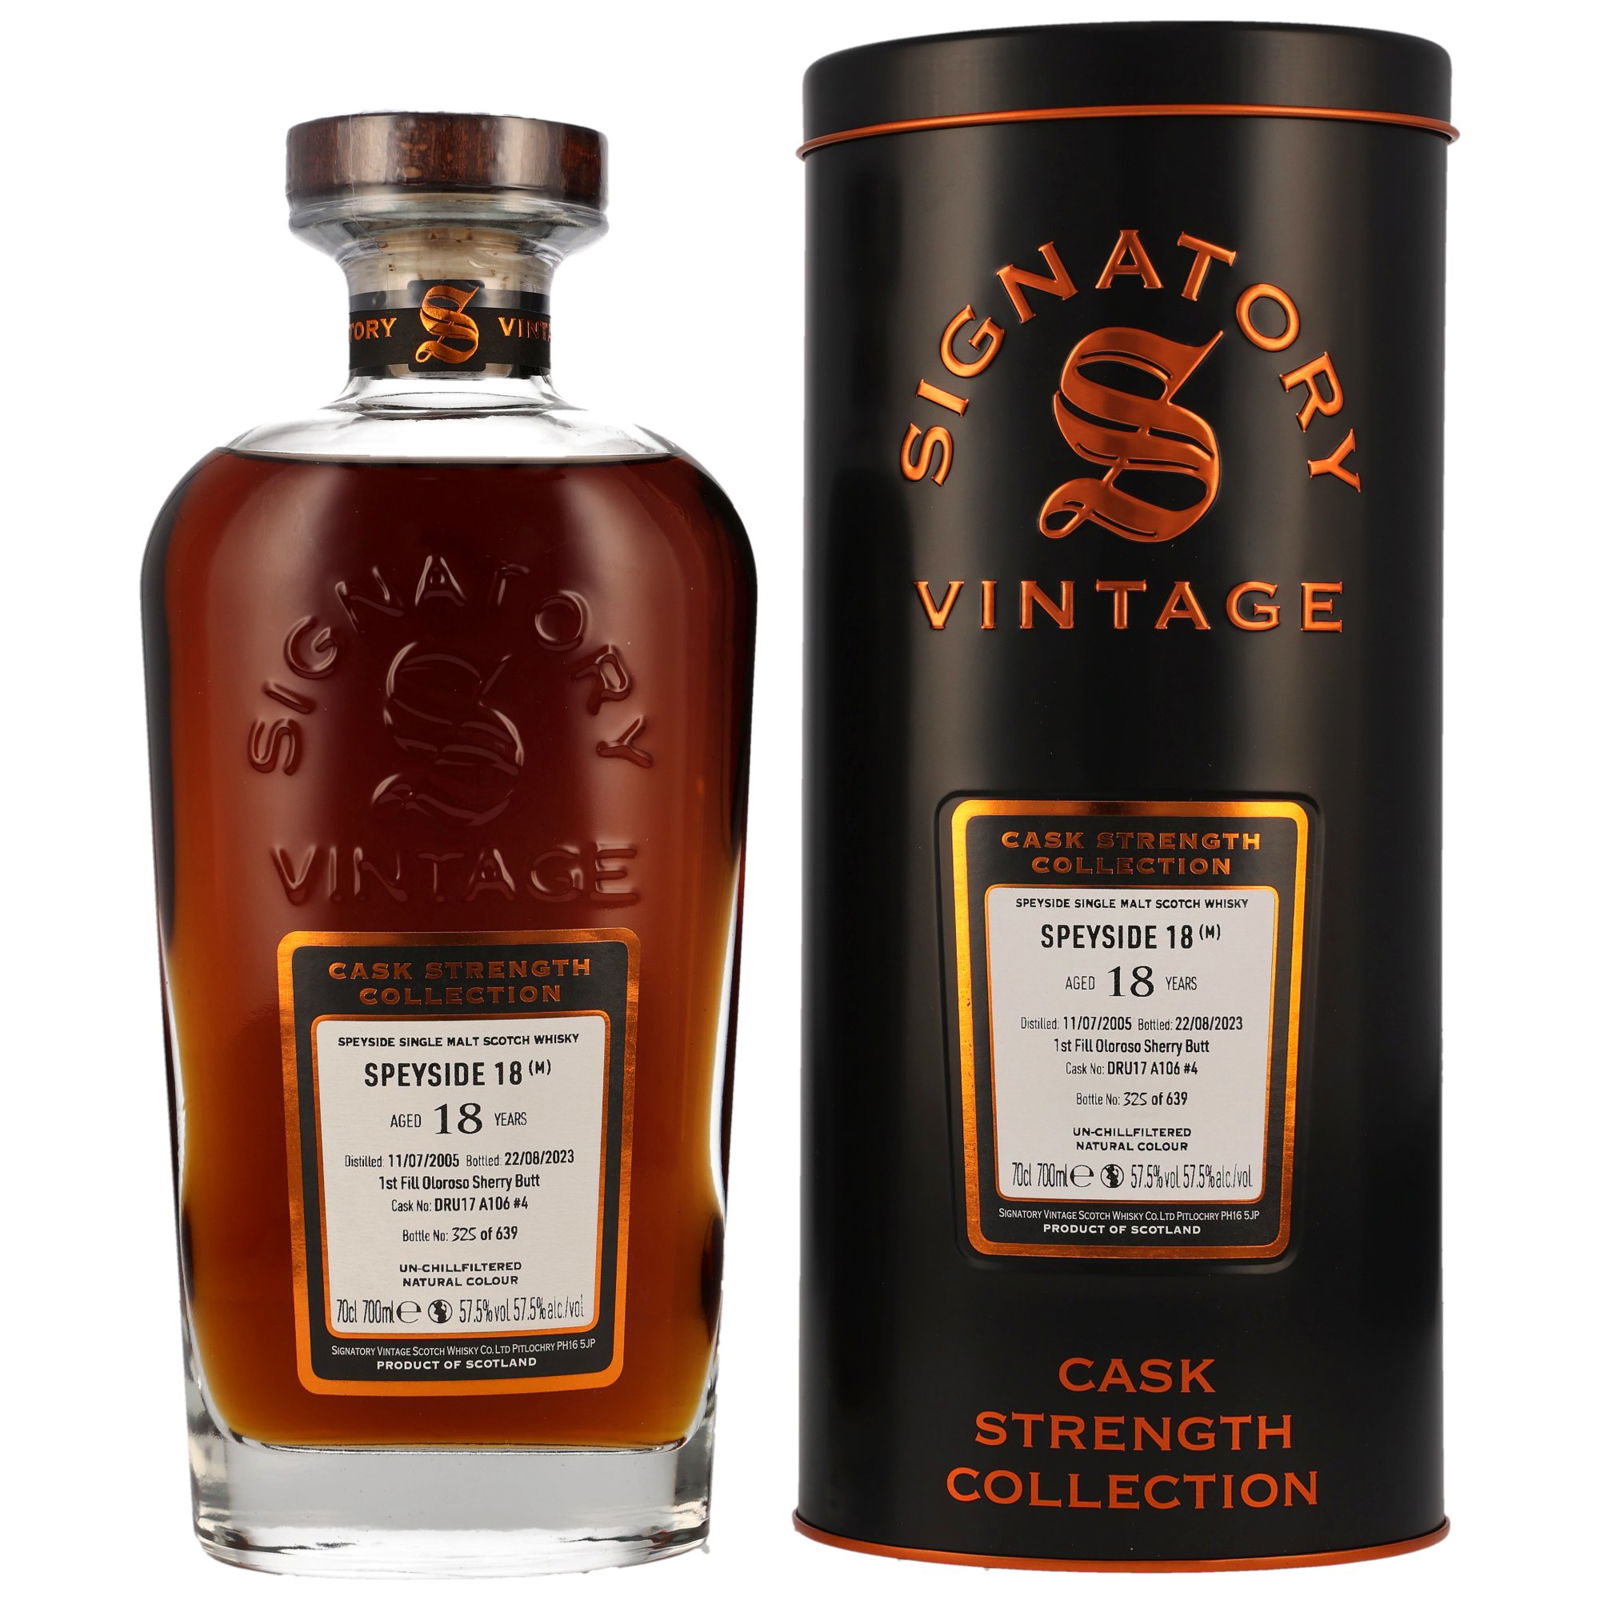 Speyside 2005/2023 - 18 Jahre First Fill Oloroso Sherry Cask No. DRU17 A106 #4 Cask Strength Collection (Signatory)